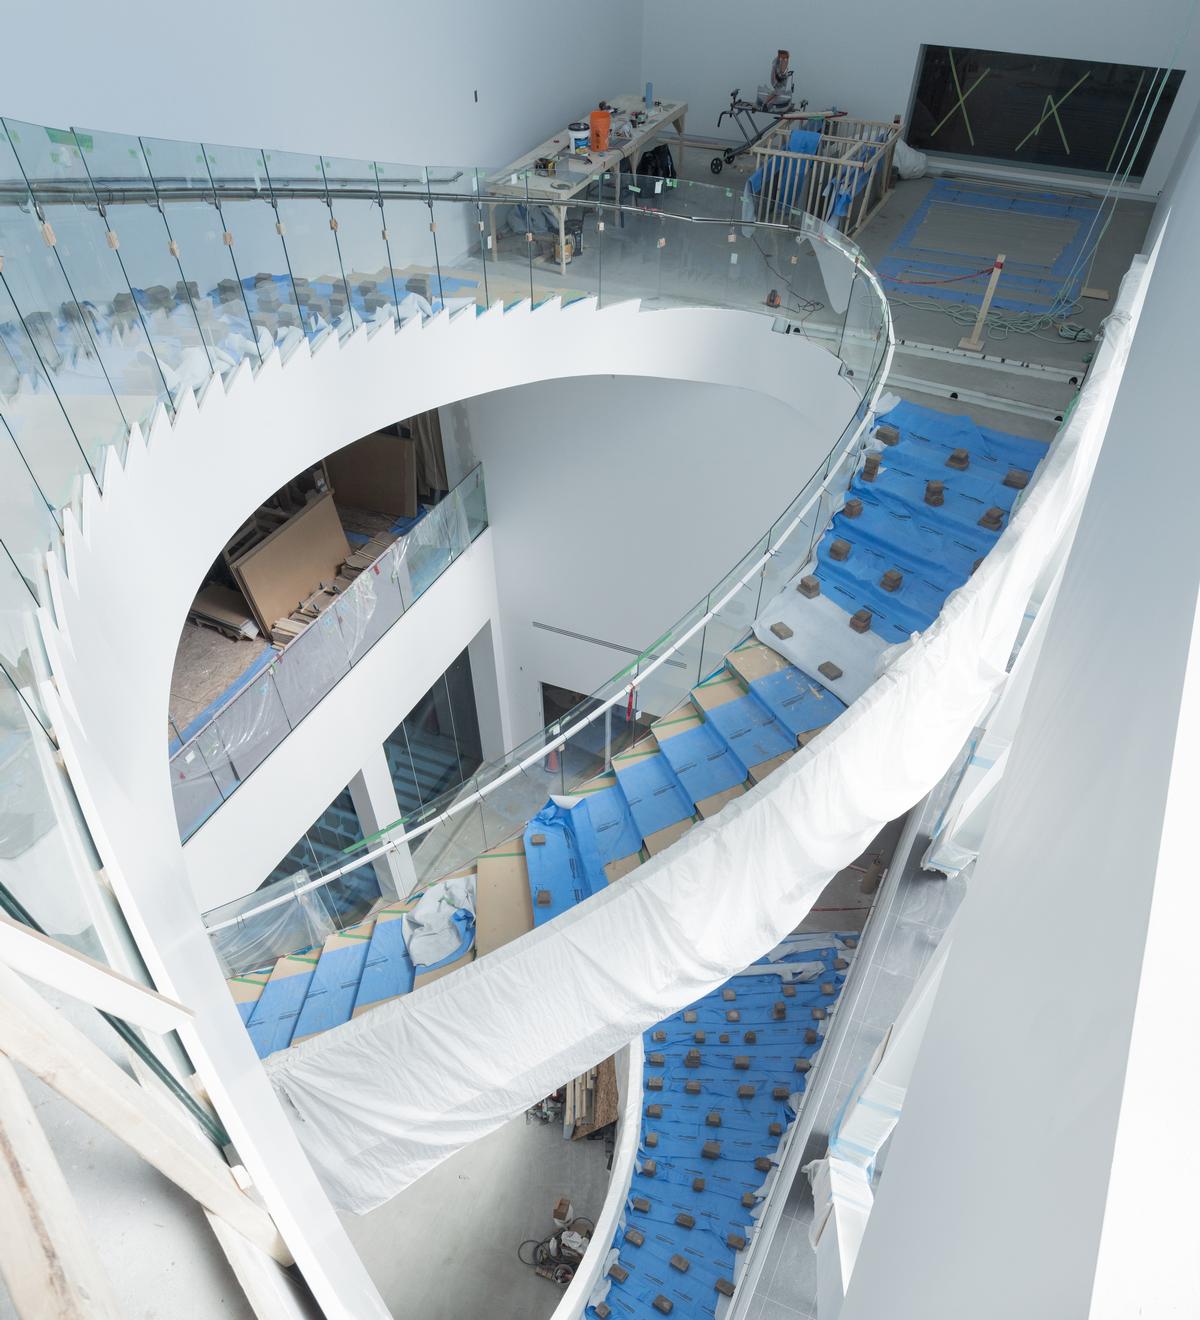 A large spiralling staircase will link the pavilion's floors / Iwan Baan